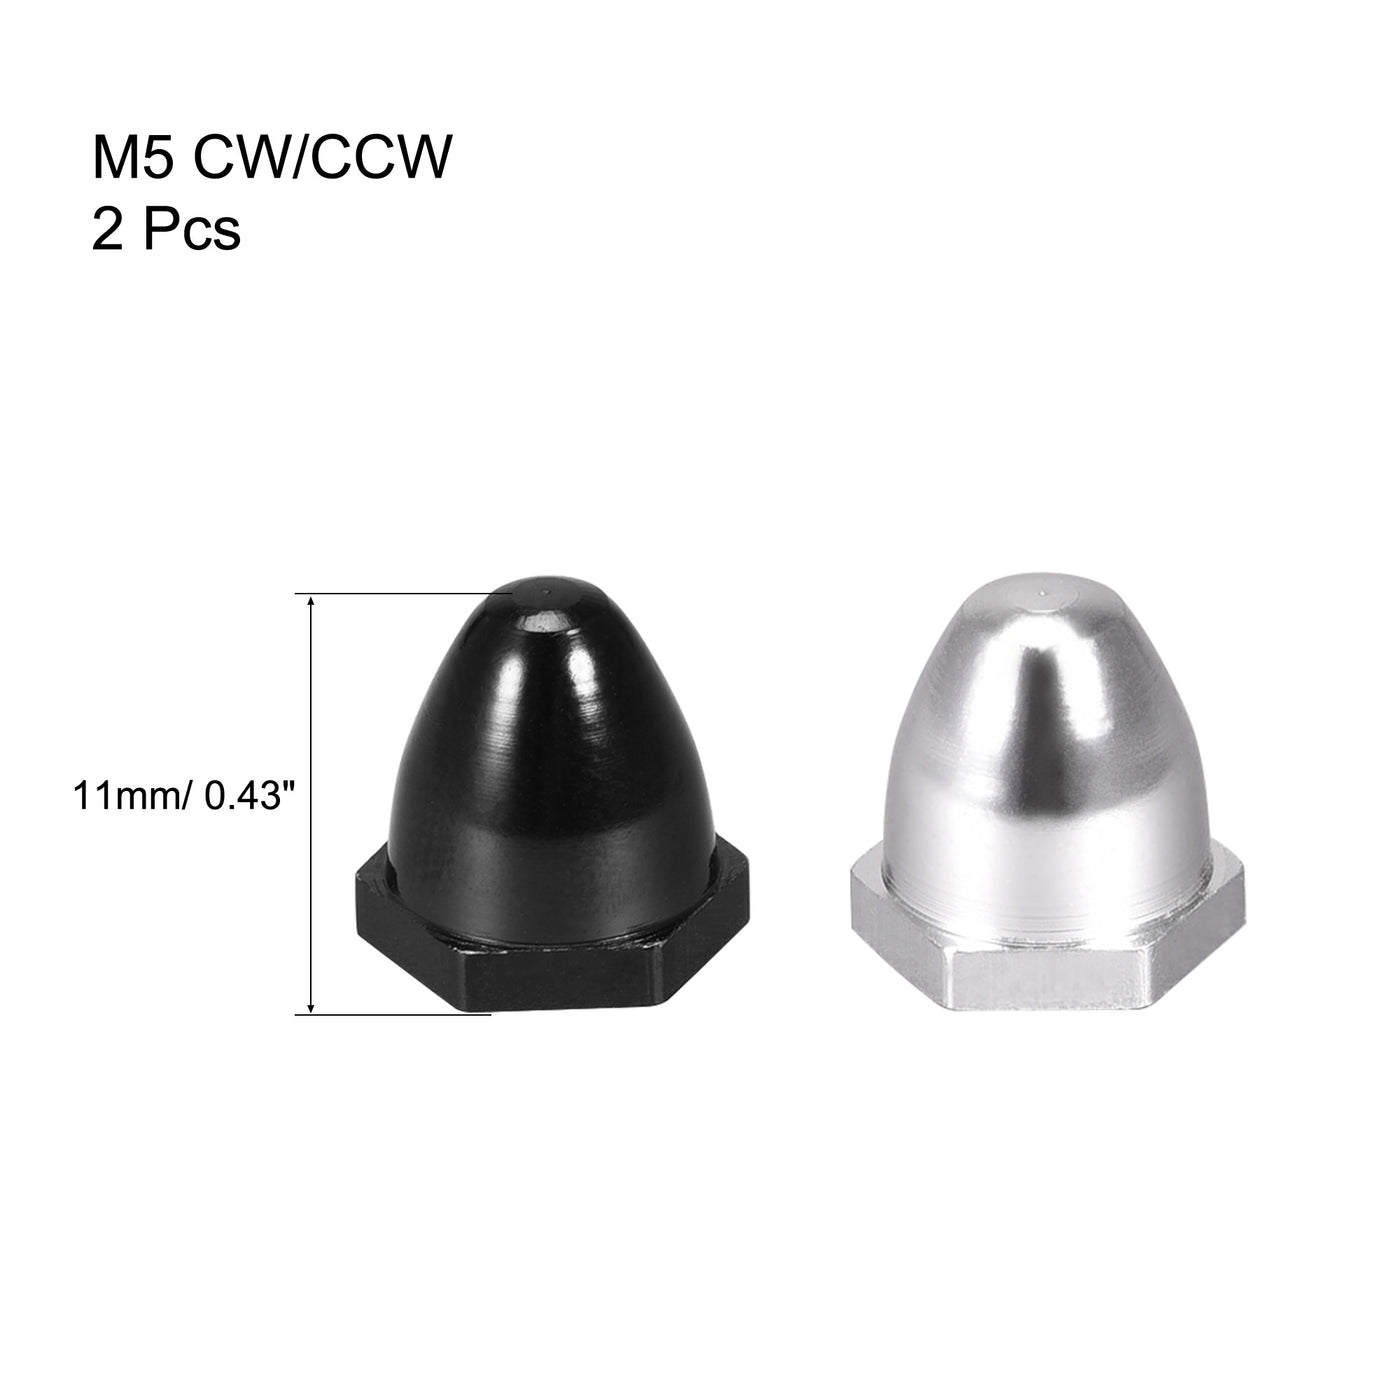 uxcell Uxcell 2pcs Propeller Nut Prop Adapter M5 /C for 1806 2204 2205 2206 2208 Motor Part